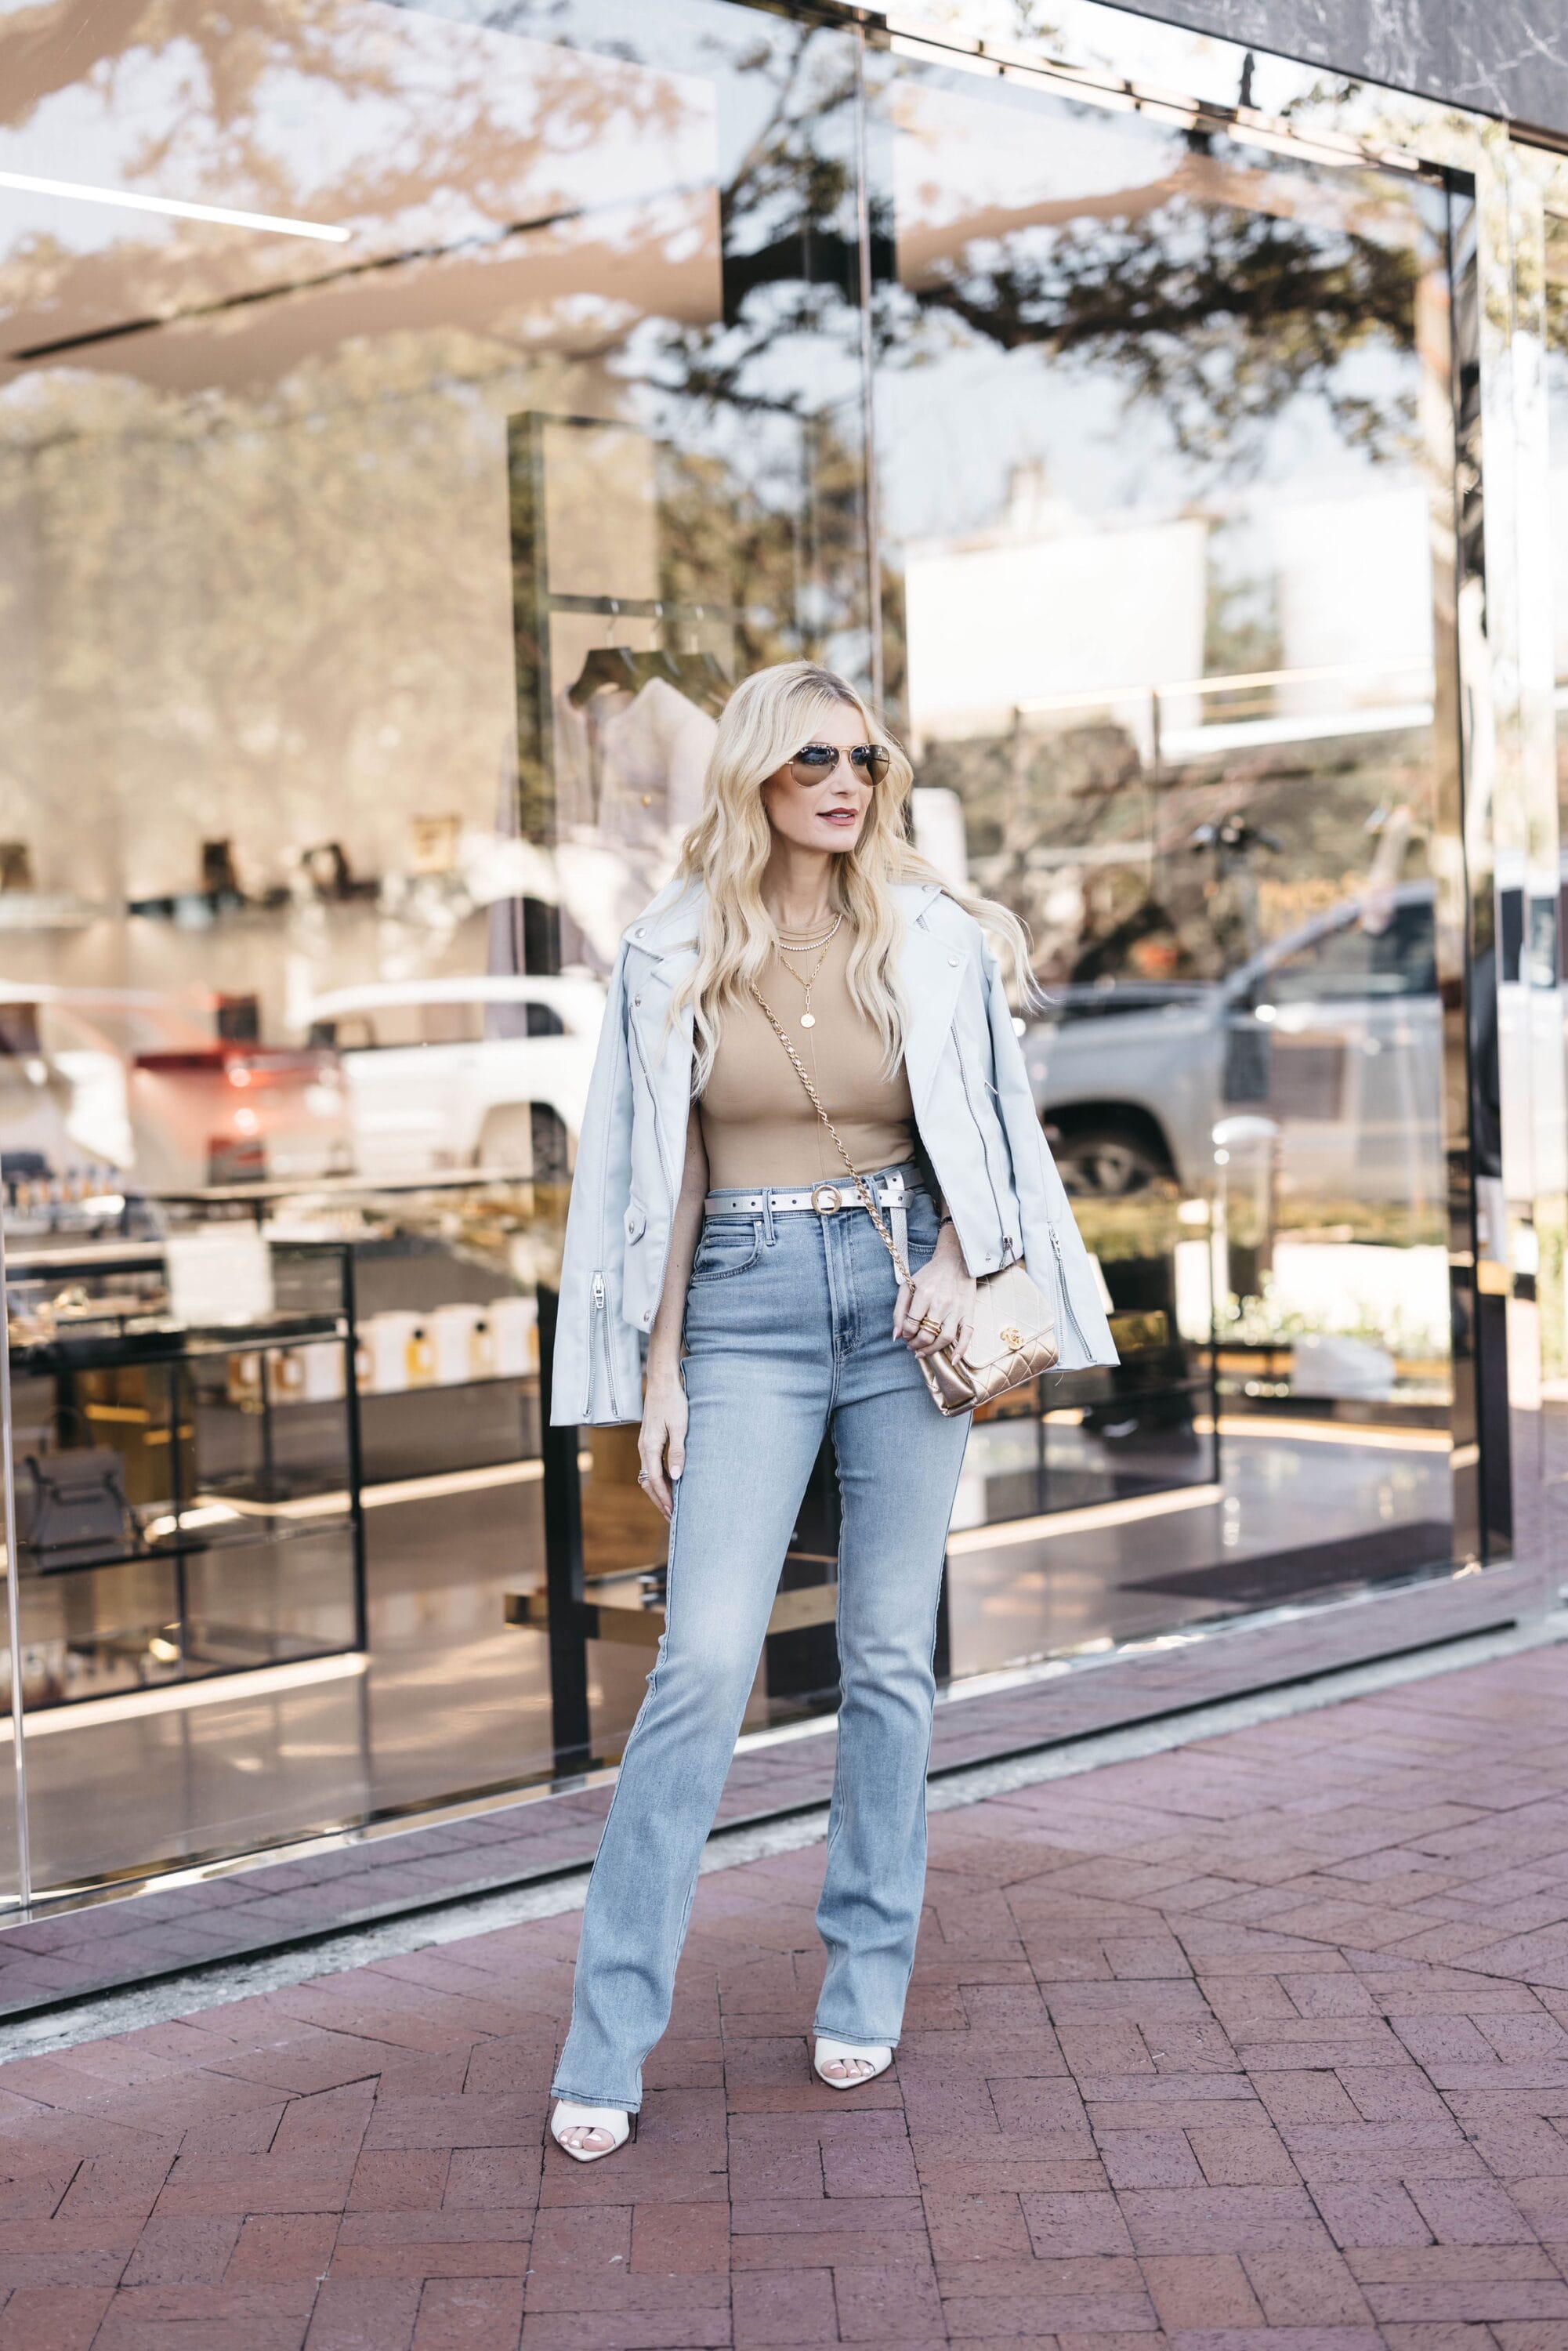 Over 40 fashion blogger wearing a blue motor jacket with mother jeans and brown bodysuit as one of 5 spring must-haves